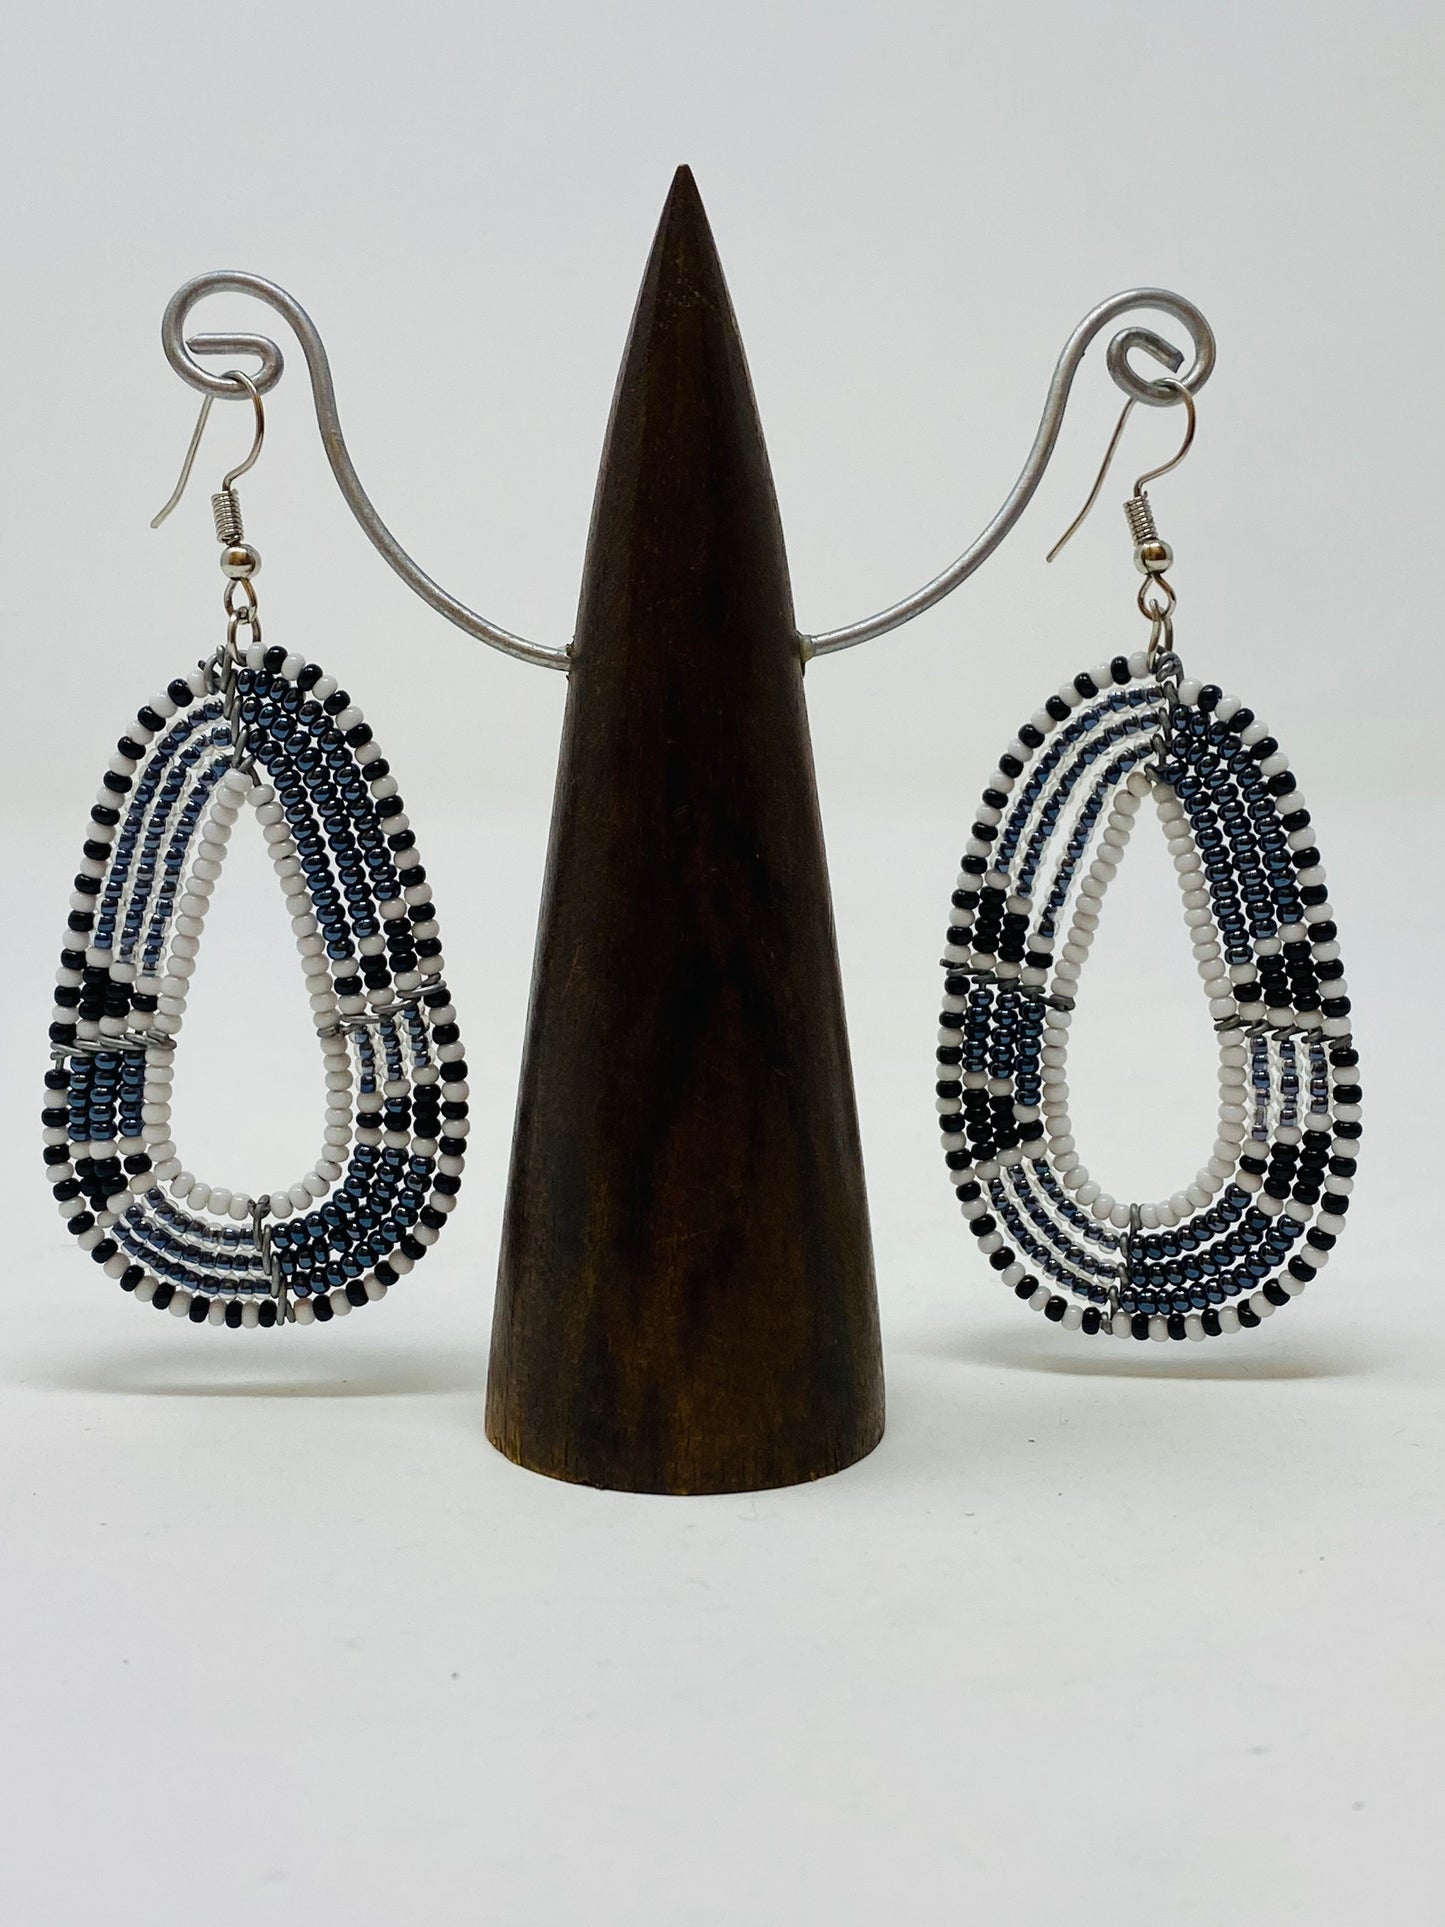 Nature inspired Oval Teardrop Earrings made with glass beads - Violet Elizabeth